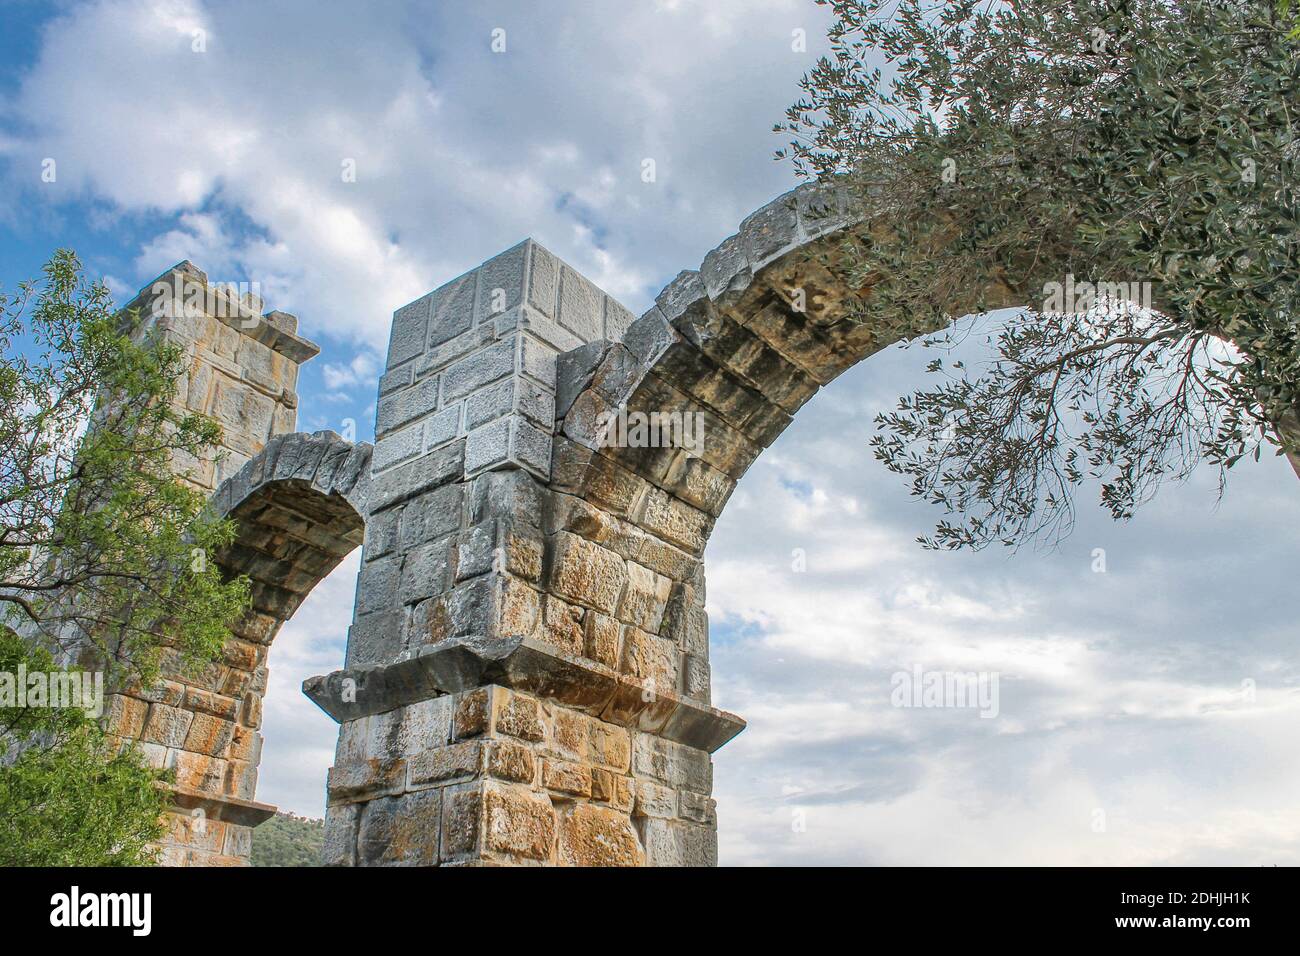 The Roman aqueduct at the village of Moria, in Lesbos island (Mytilene), Greece. Stock Photo